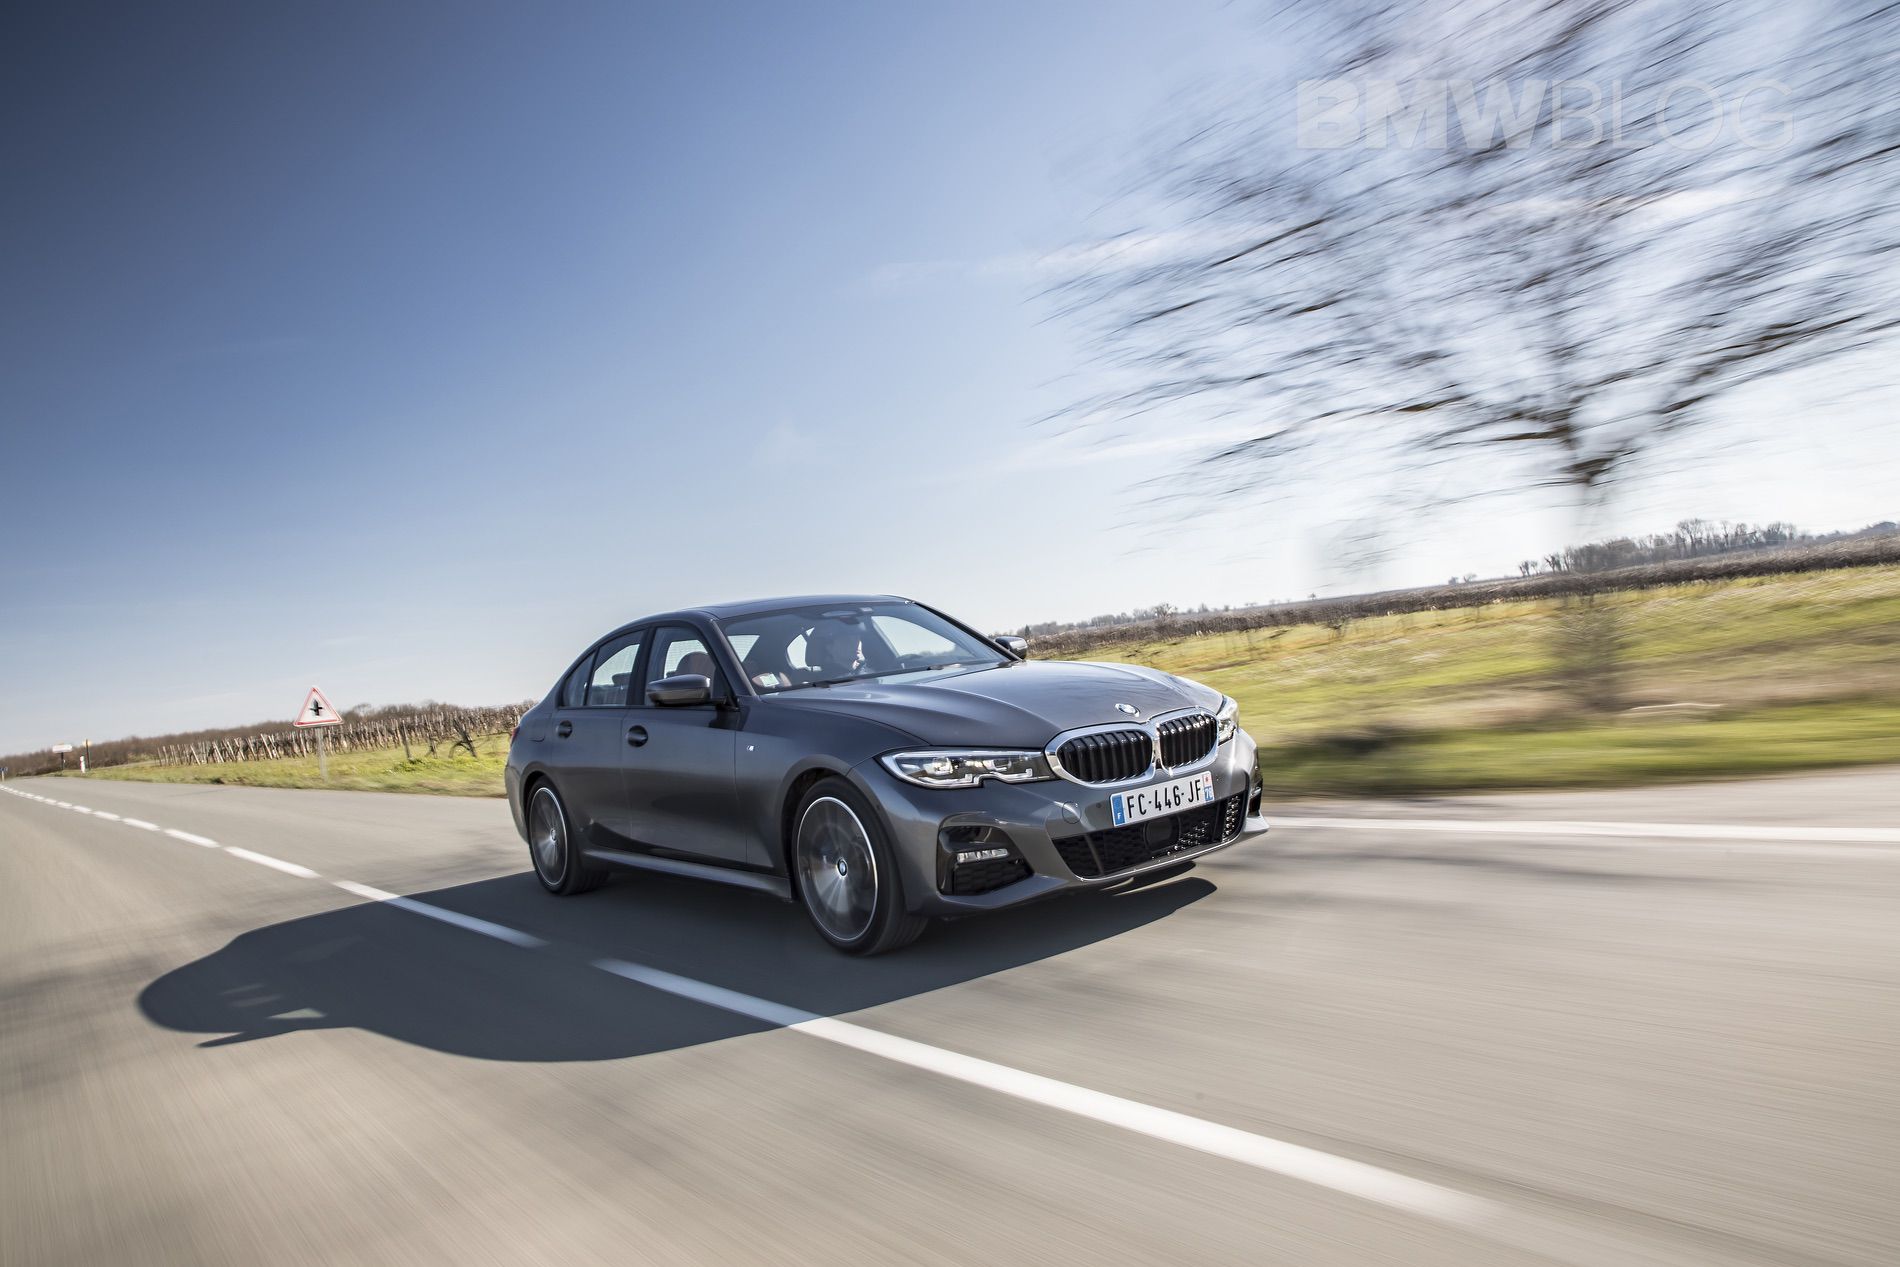 The new BMW G20 3 Series 330i M Sport in Mineral Grey